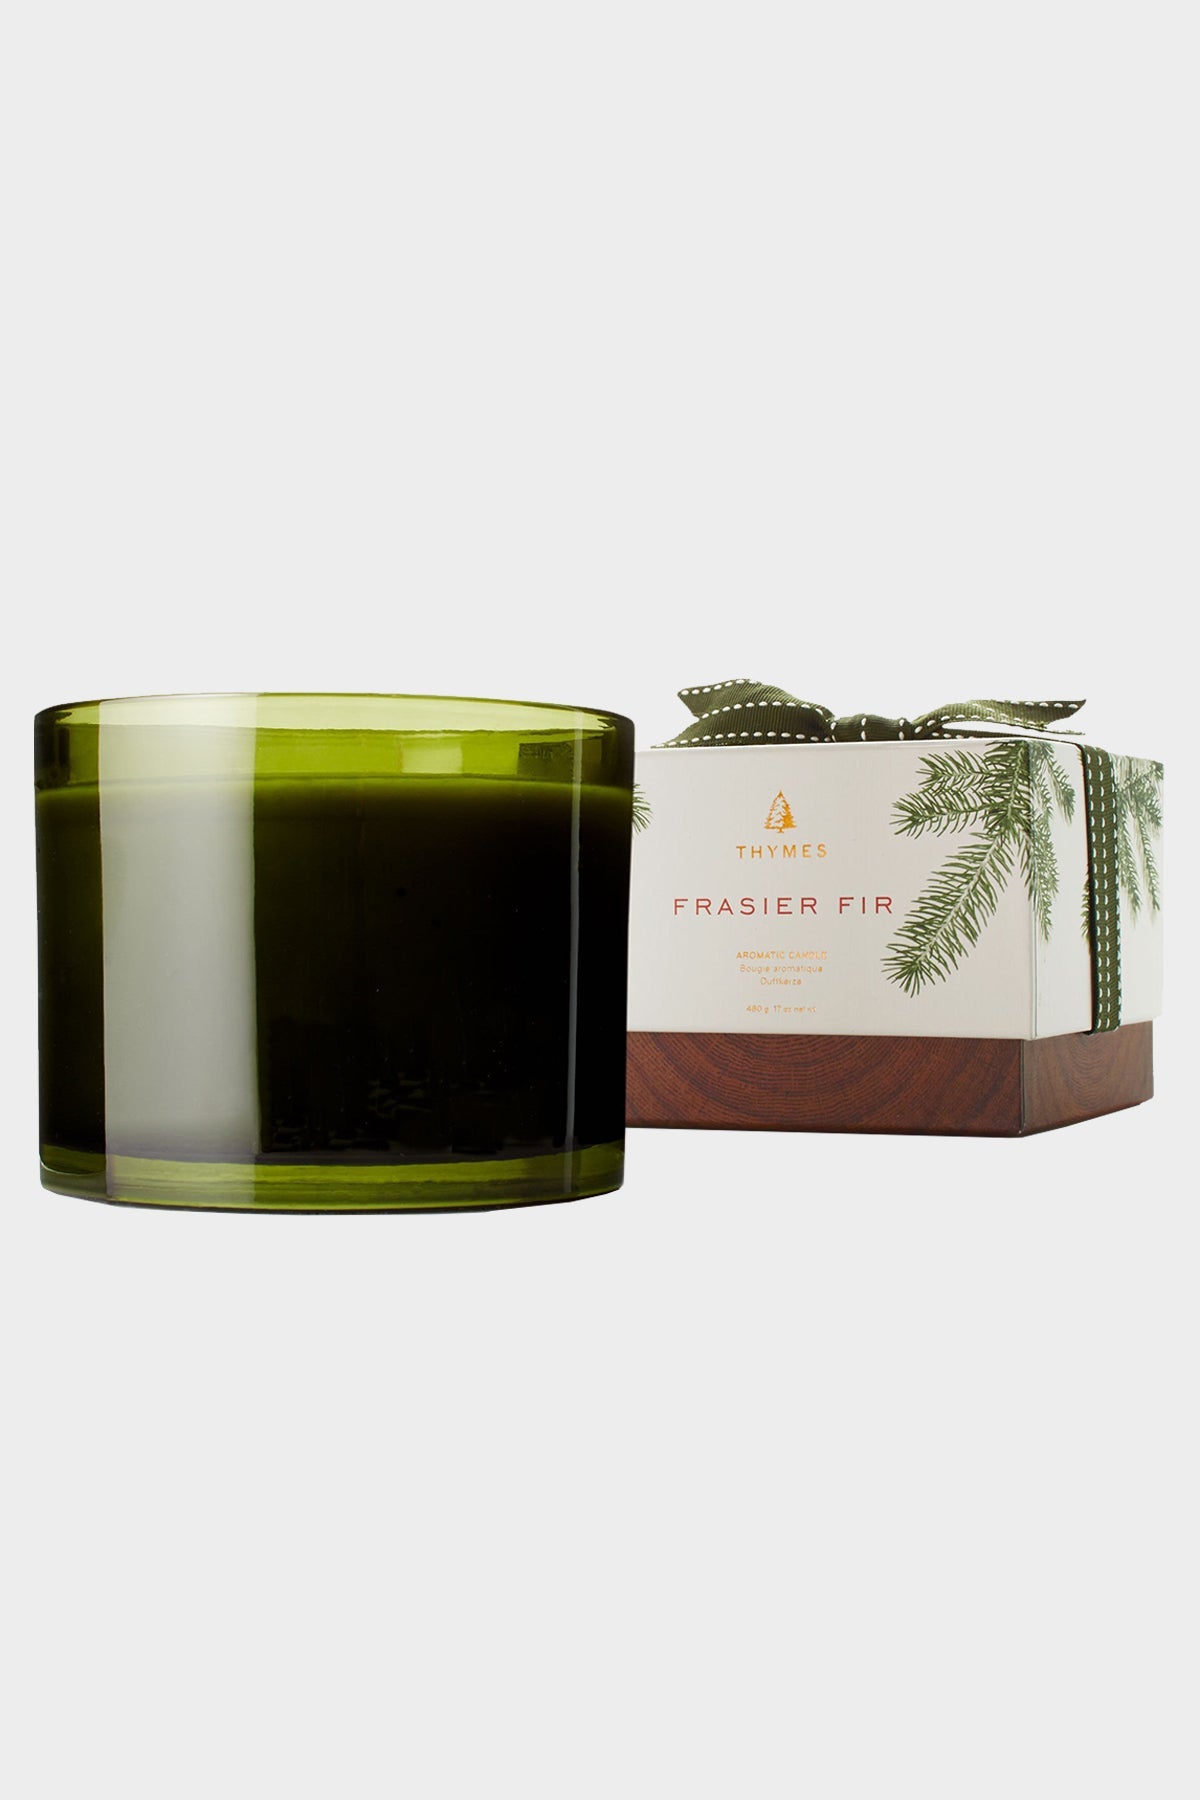 Frasier Fir Petite Molded Pinecone Candle